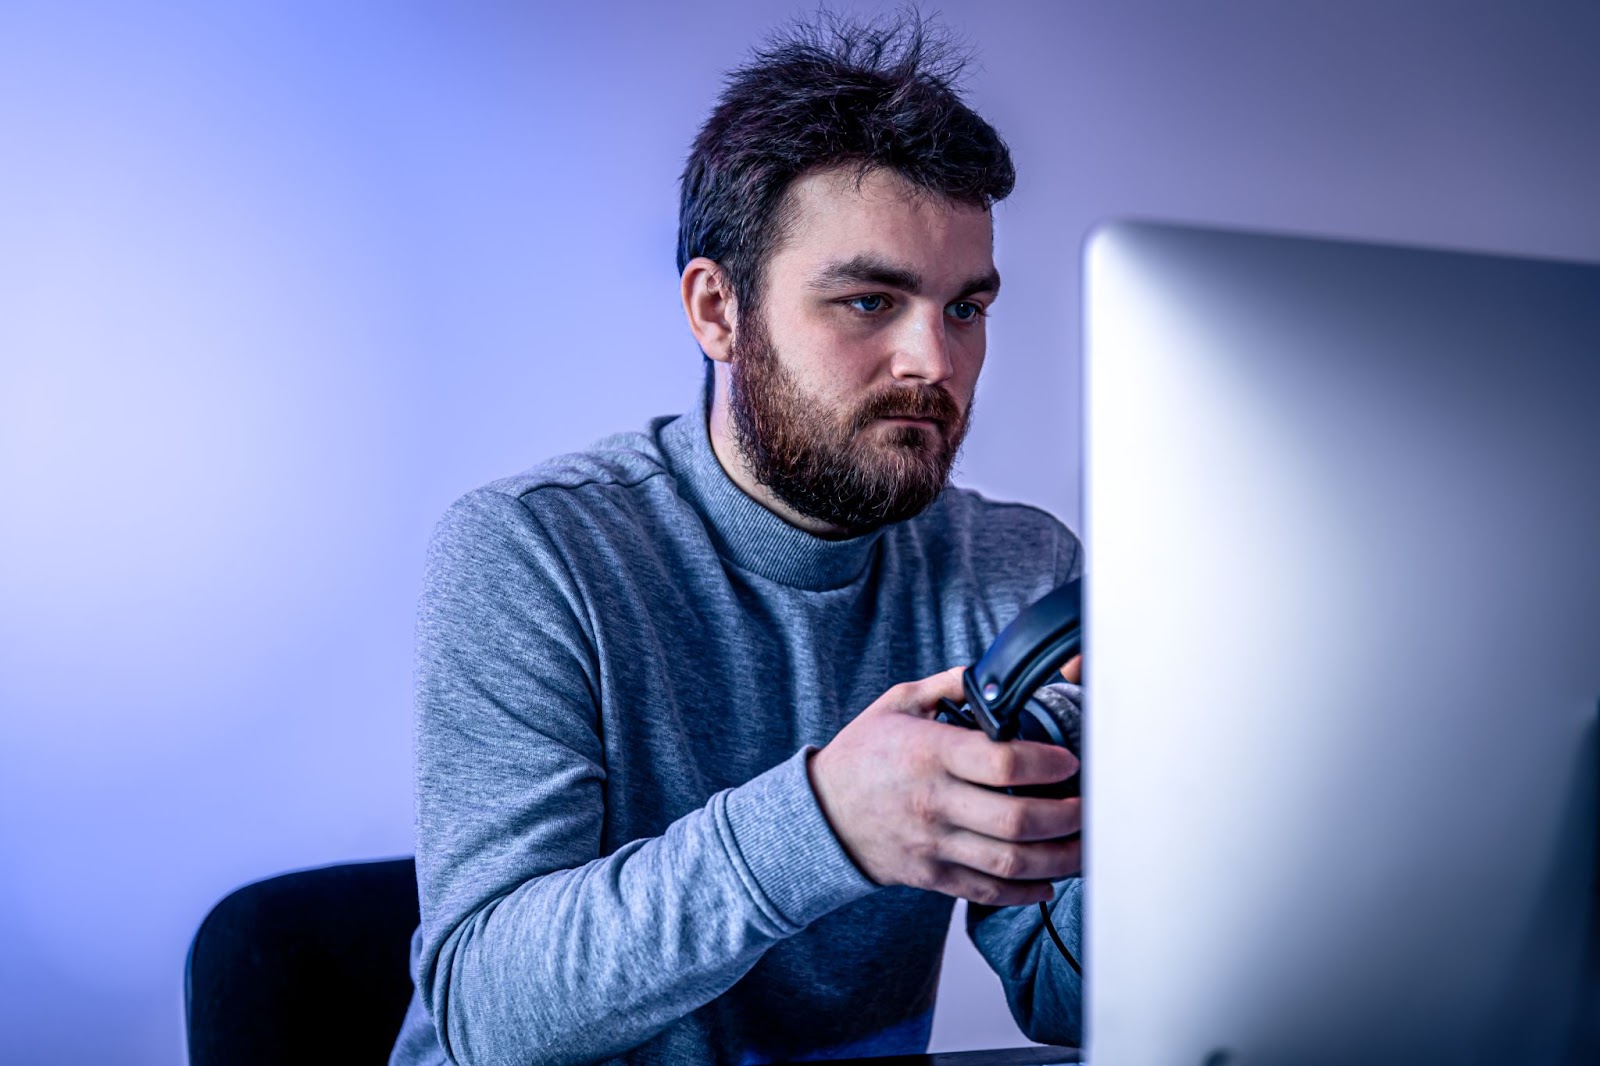 The man stares intently at the computer